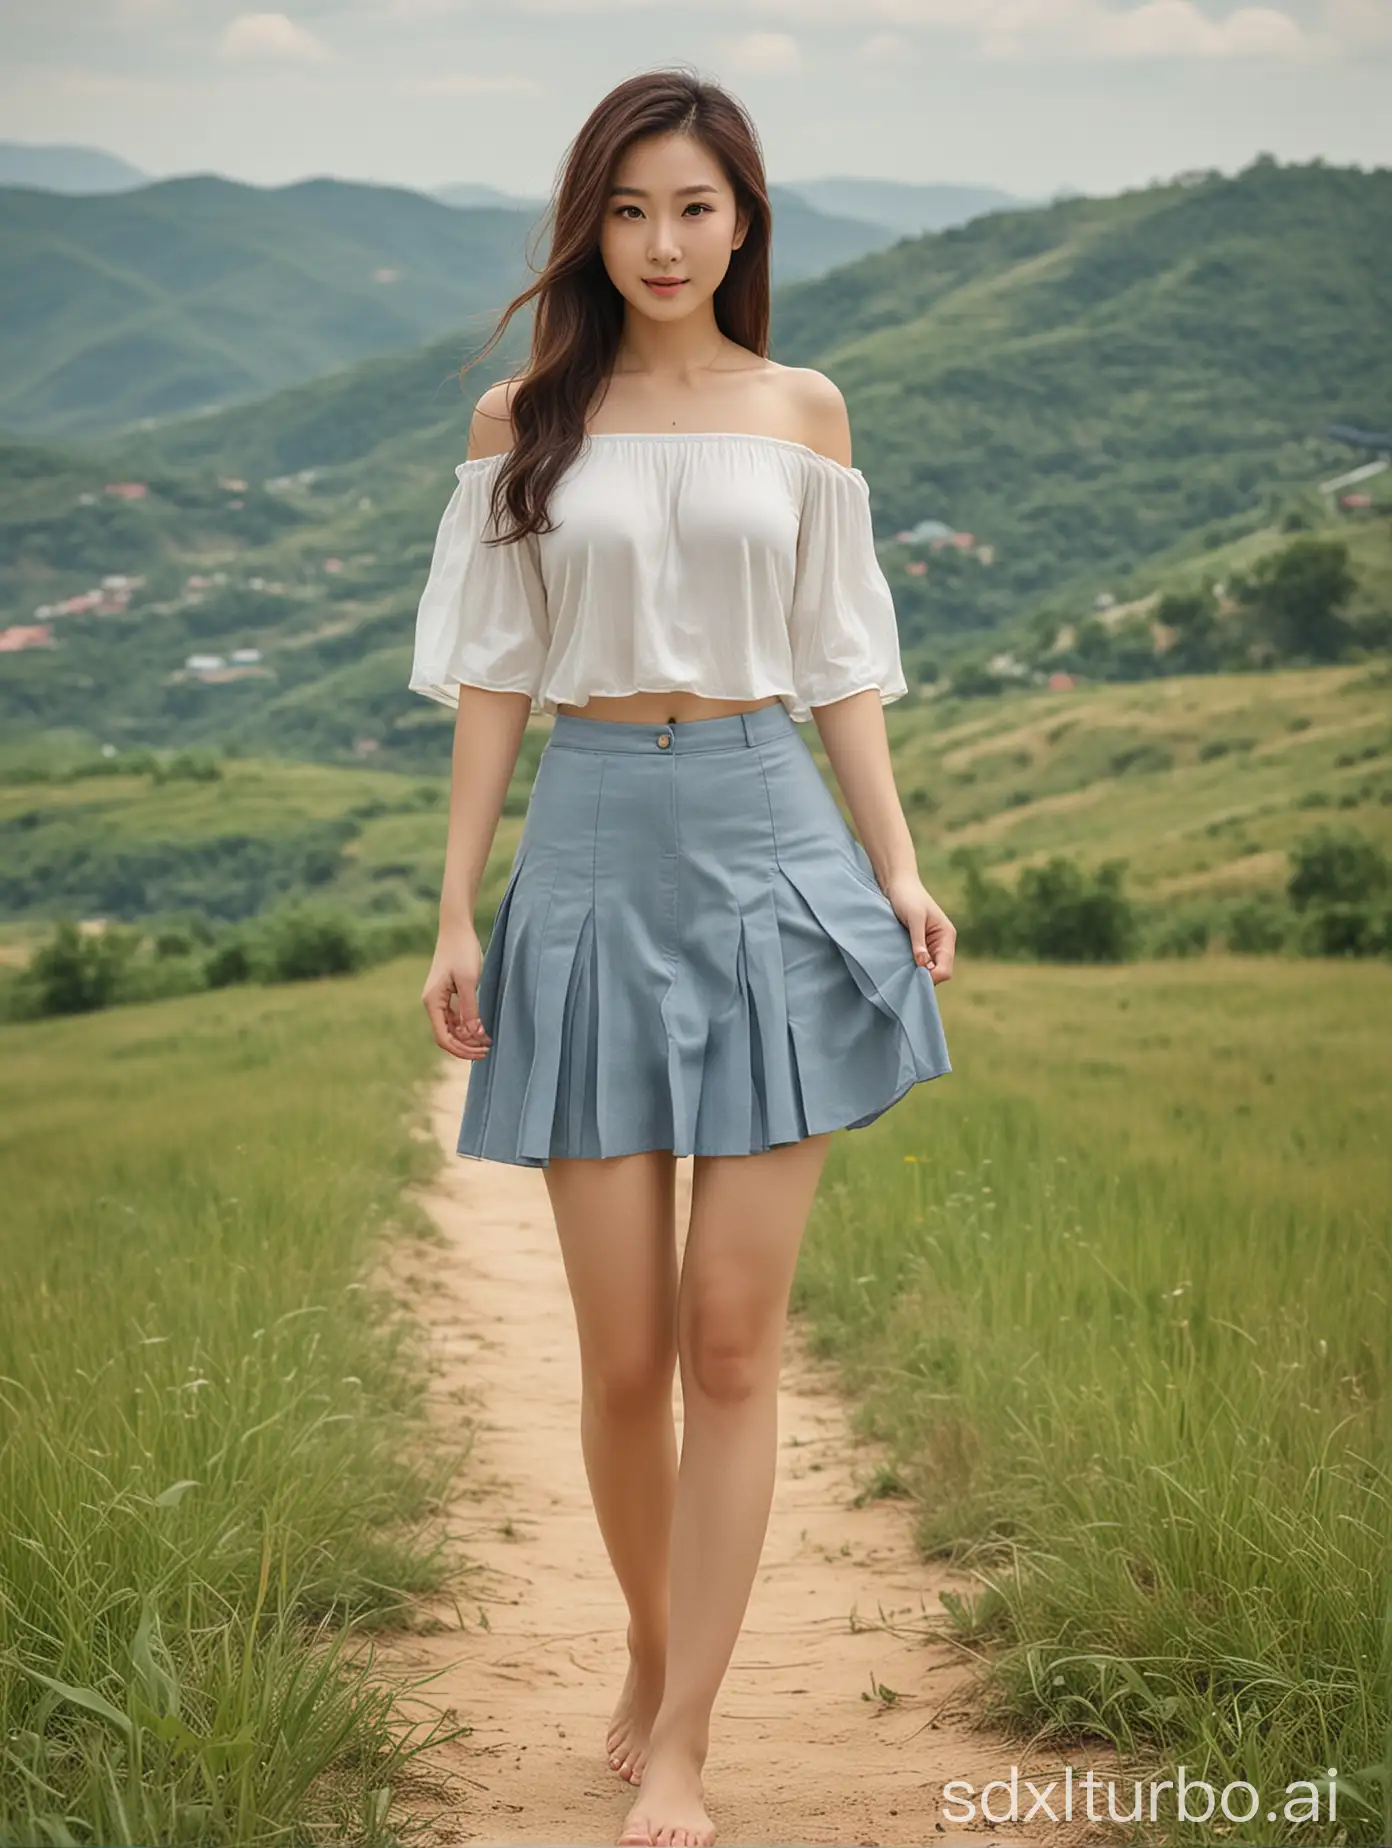 Chinese-Woman-Walking-in-Rolling-Hills-Landscape